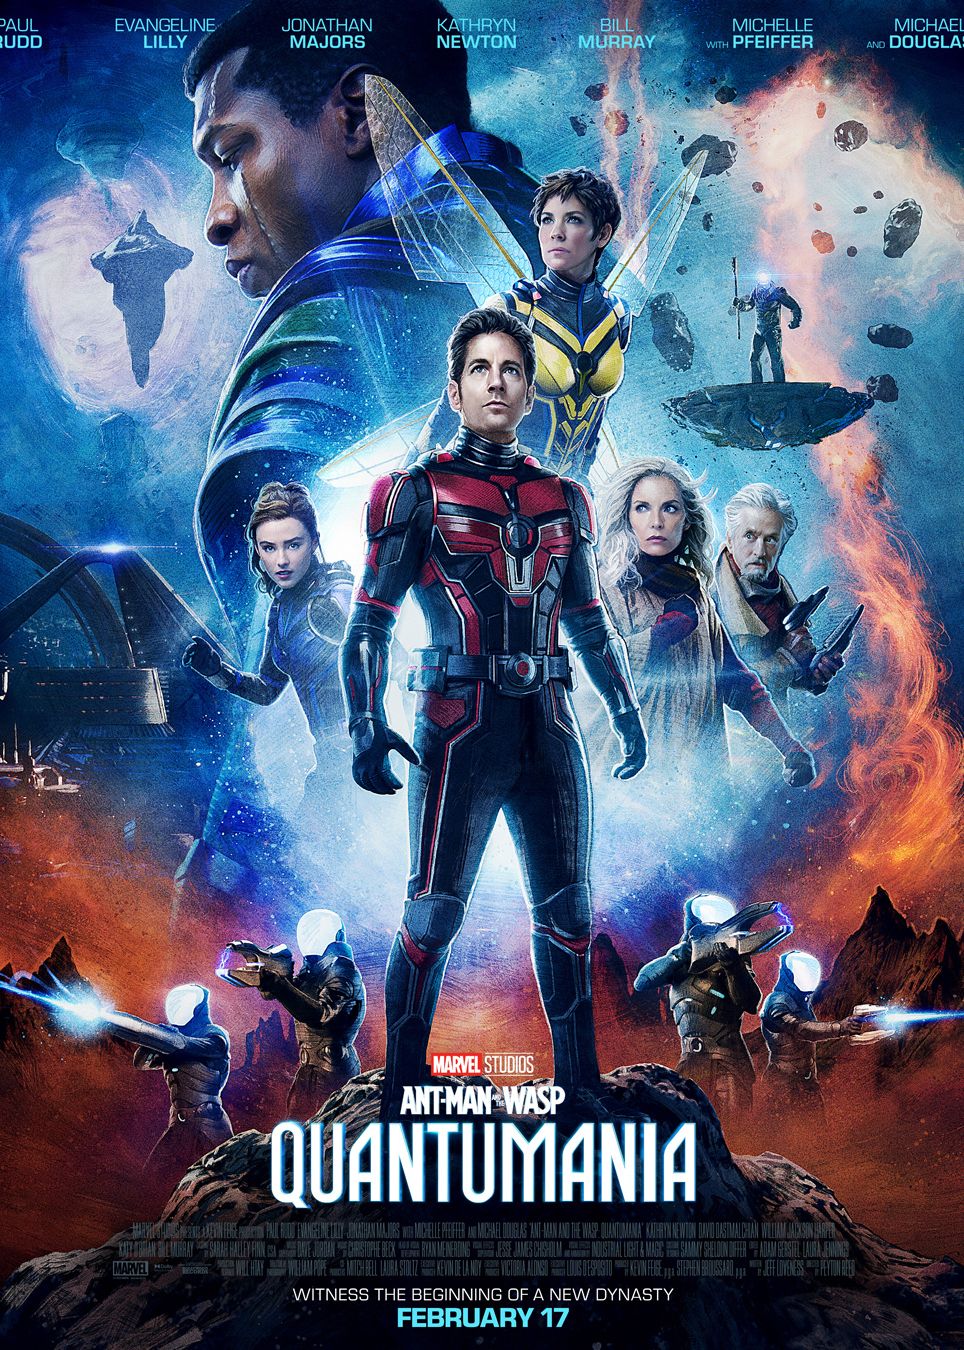 Ant-Man and the Wasp: Quantumania (2023) Review – The Action Elite